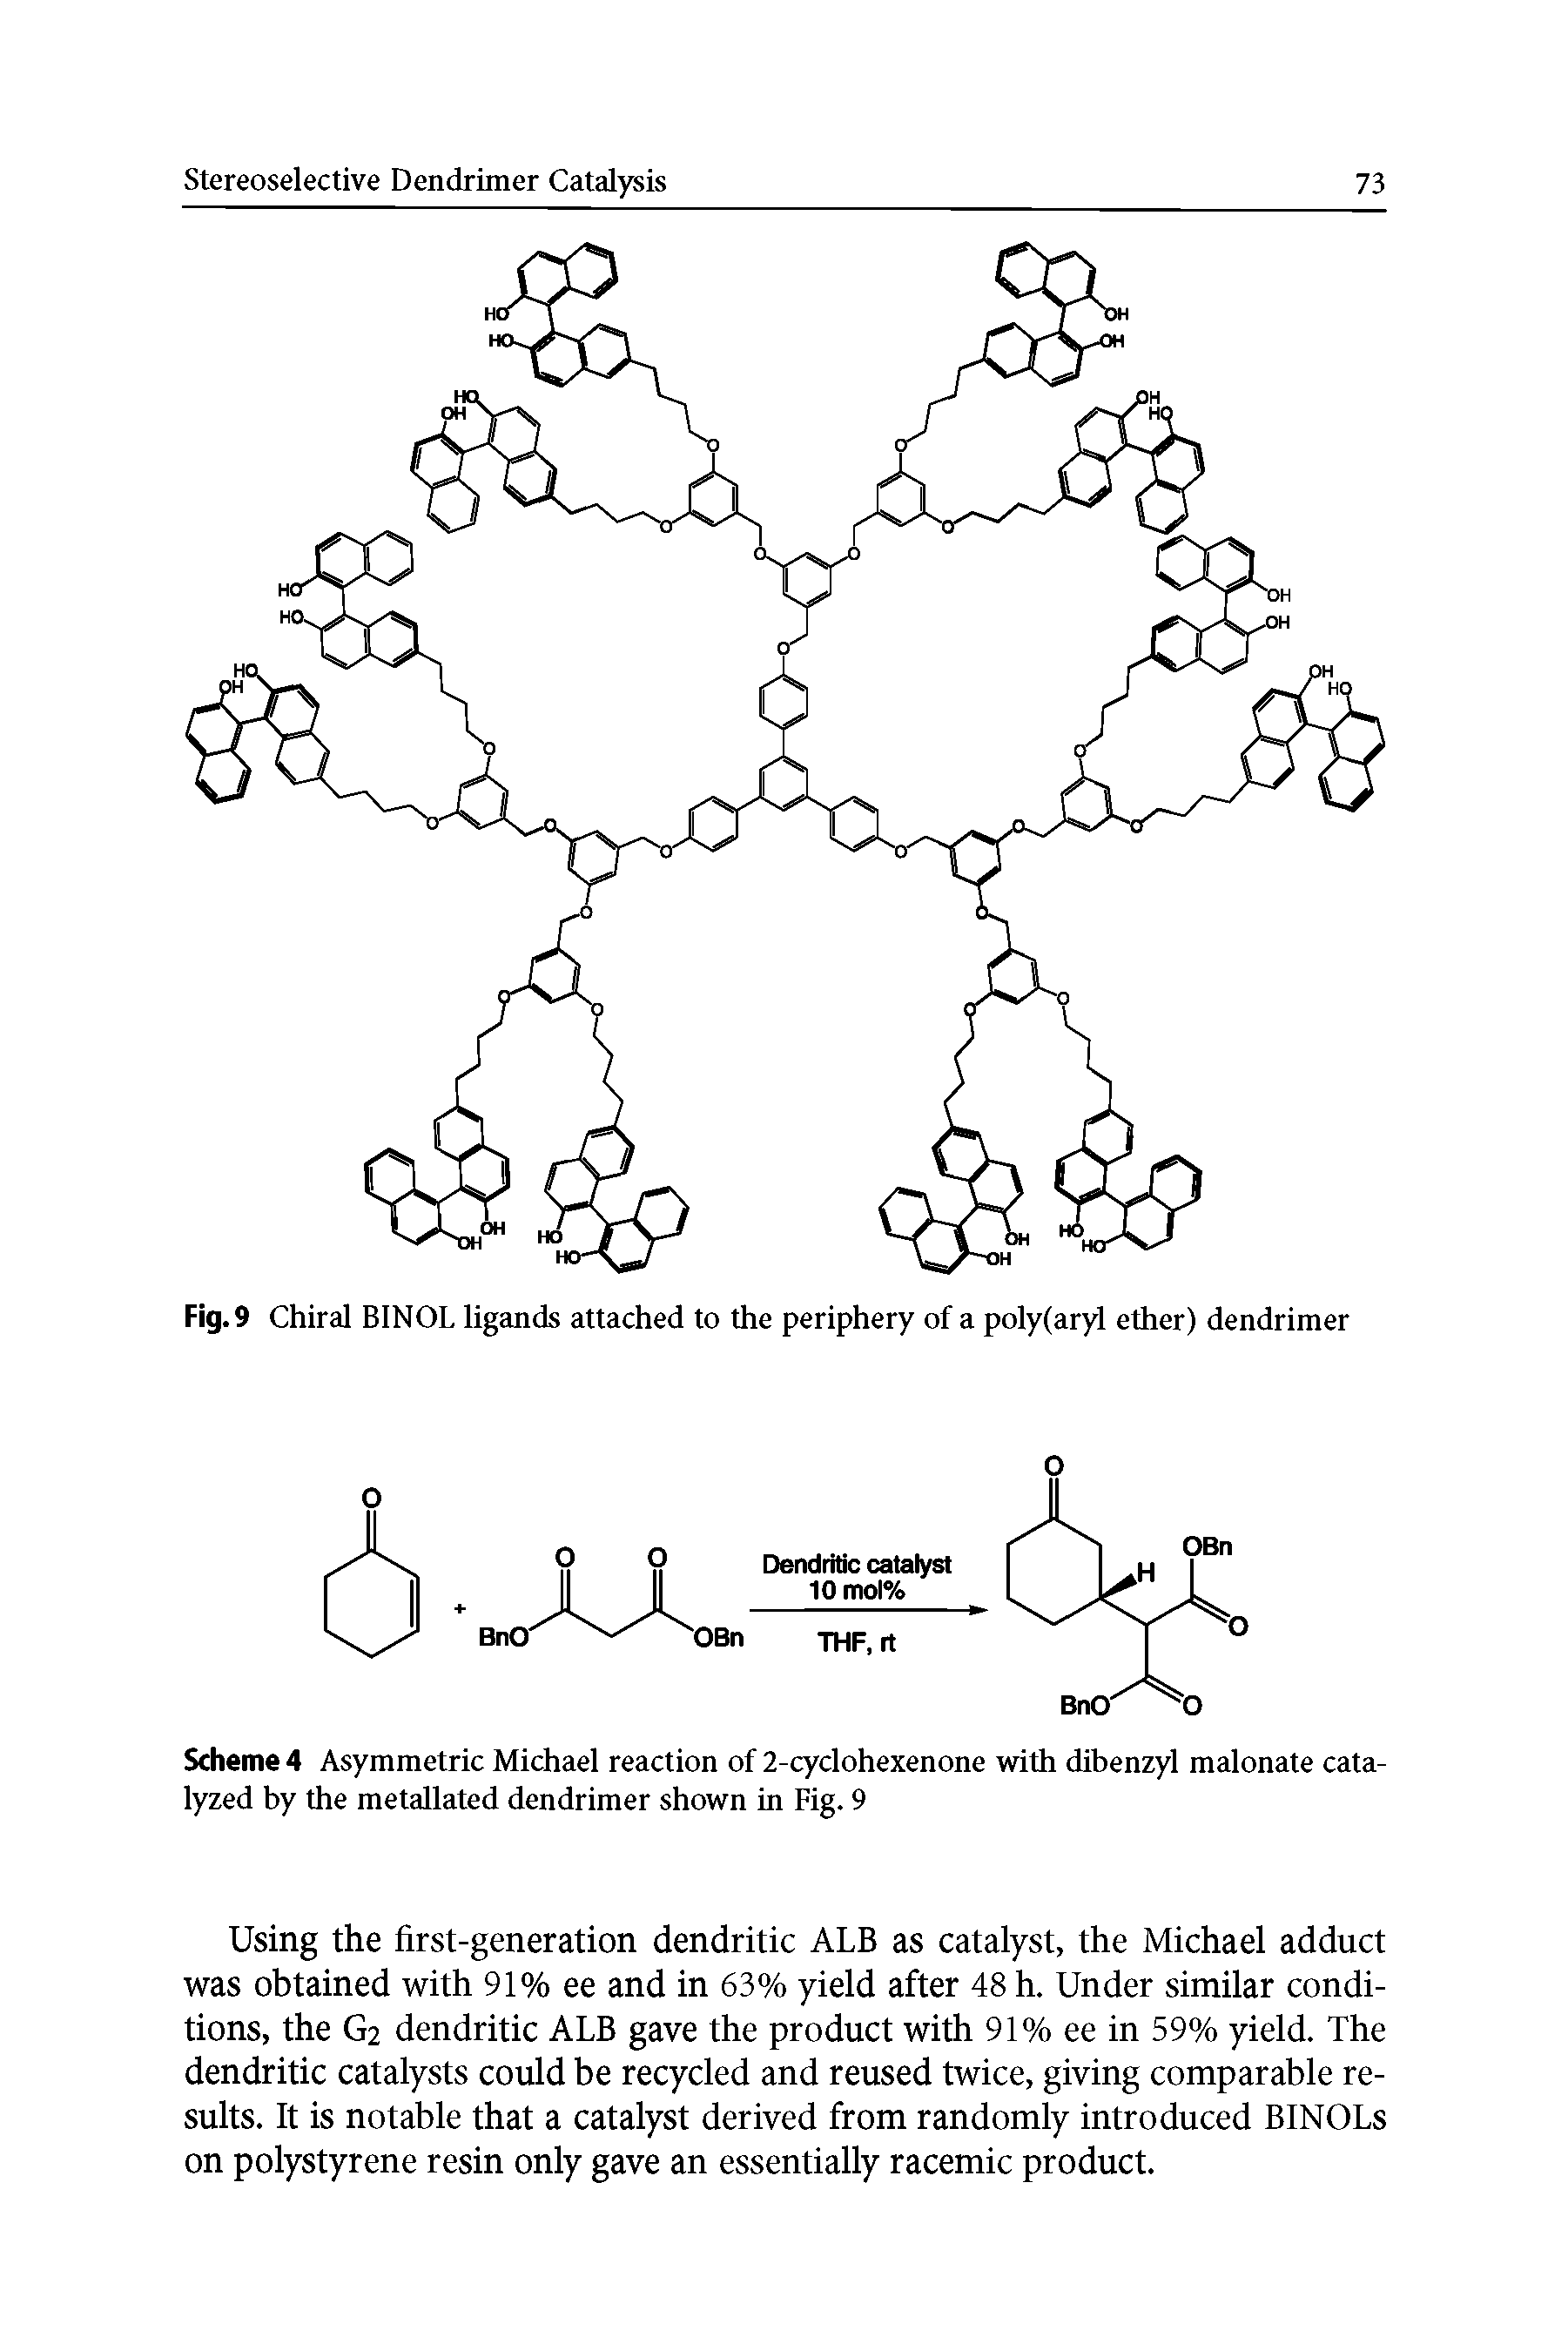 Scheme 4 Asymmetric Michael reaction of 2-cyclohexenone with dibenzyl malonate catalyzed by the metallated dendrimer shown in Fig. 9...